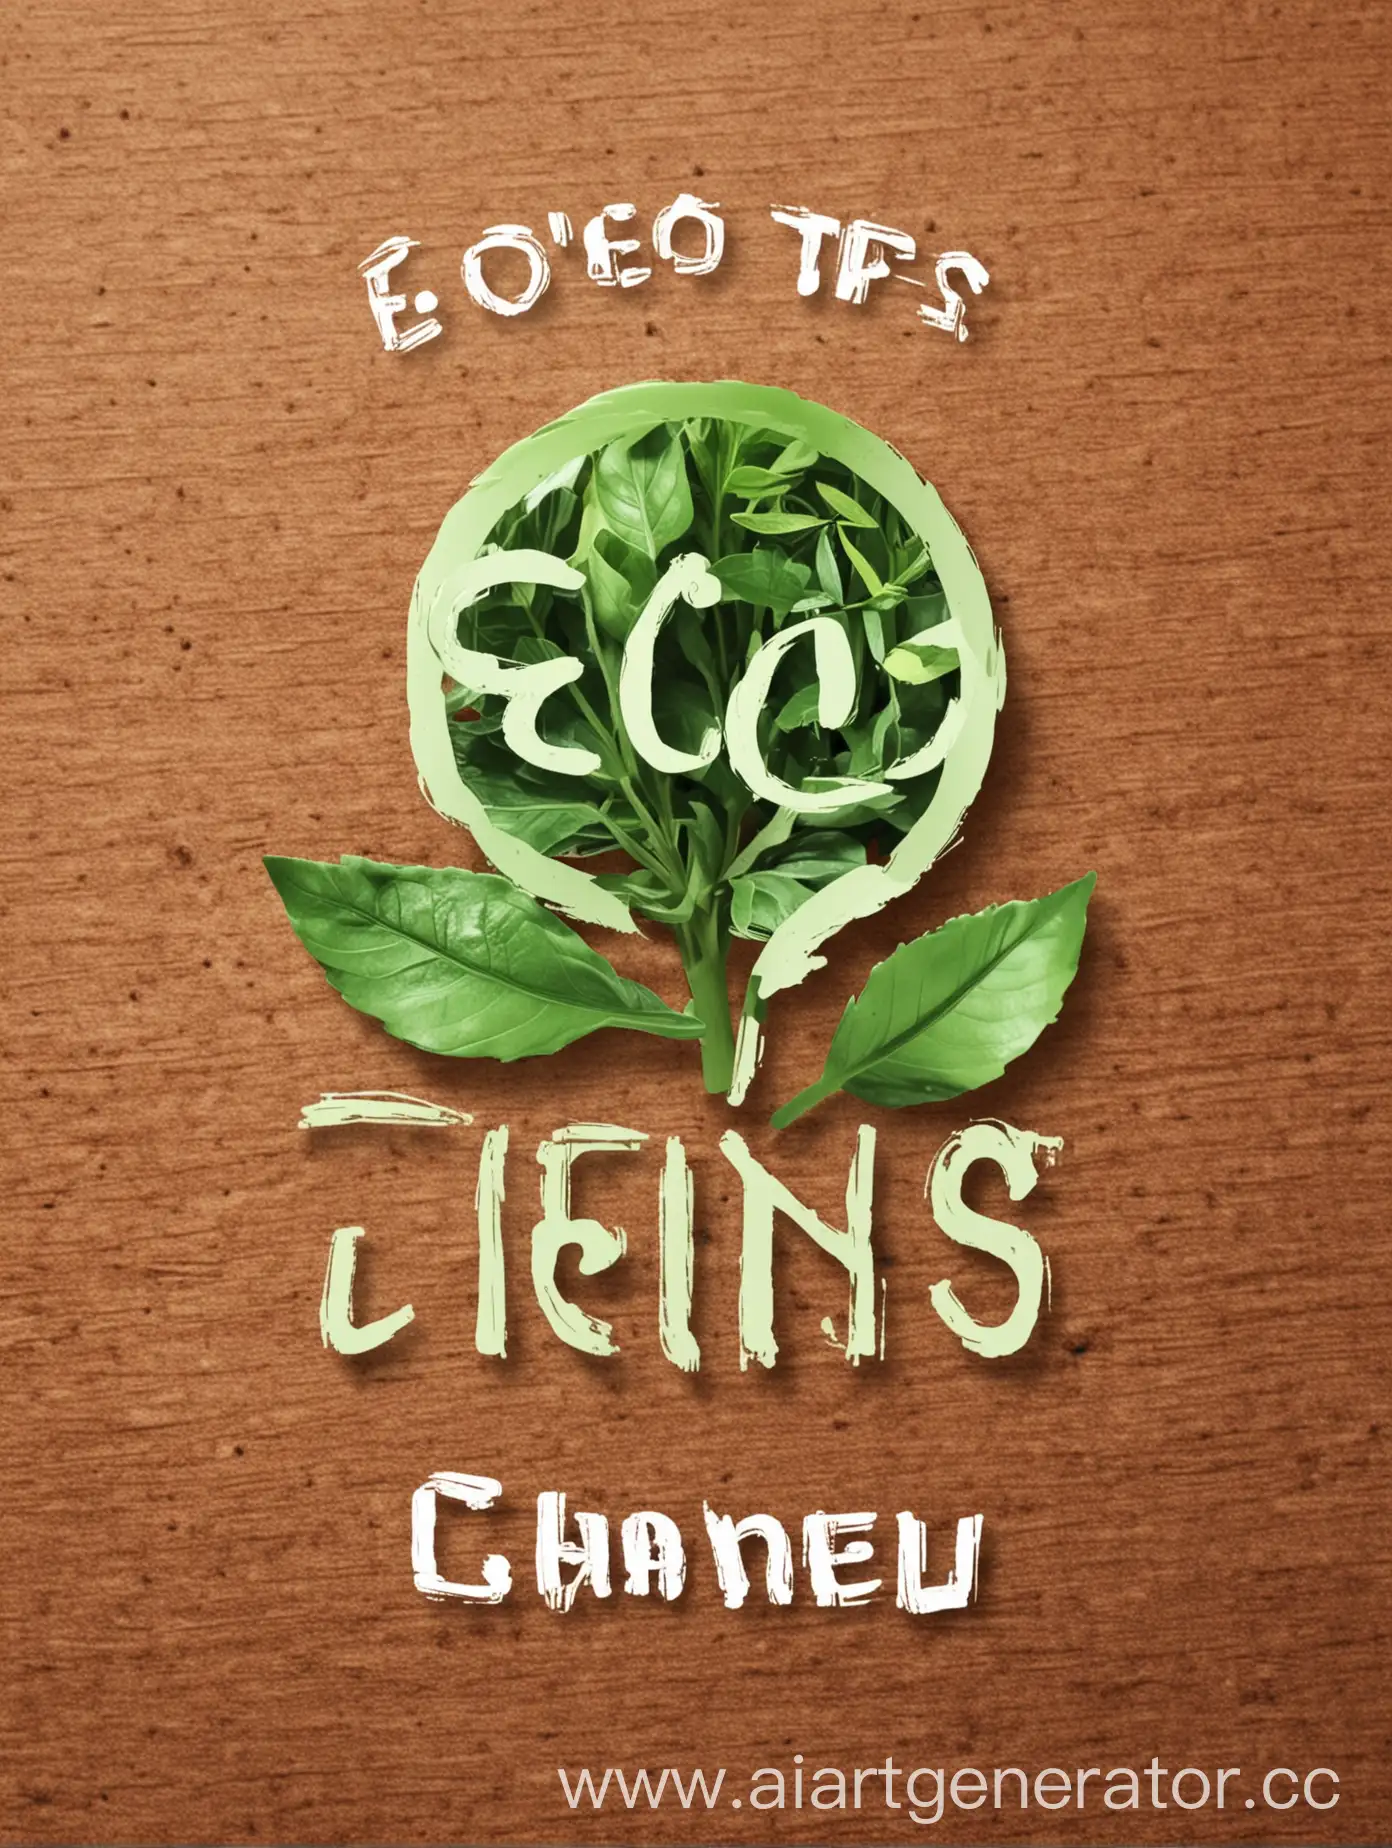 EcoTips-Channel-Logo-with-Inscription